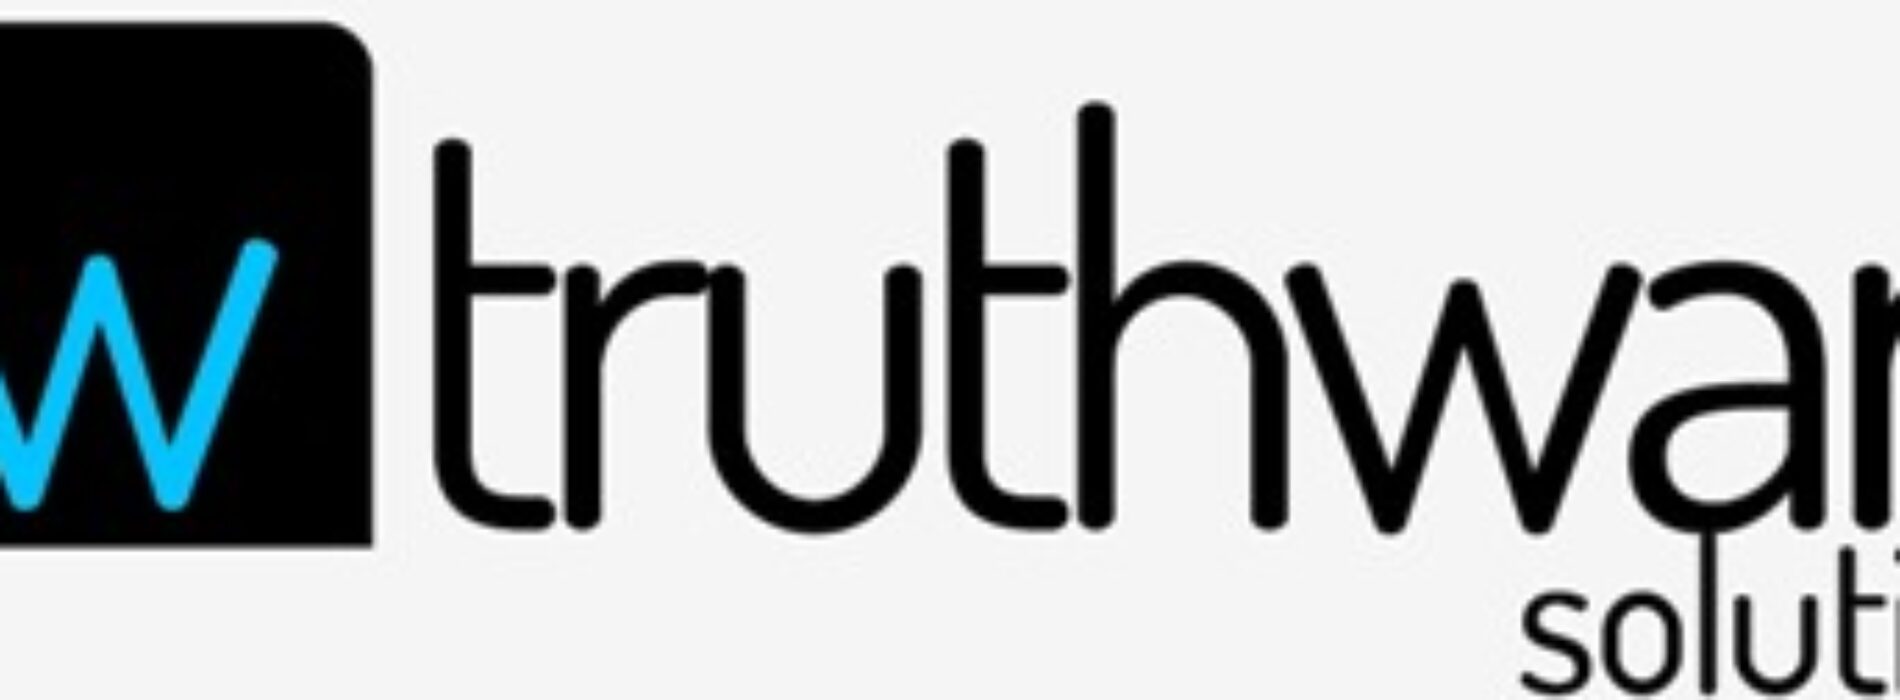 Truthware Solutions launches embedded health insurance product